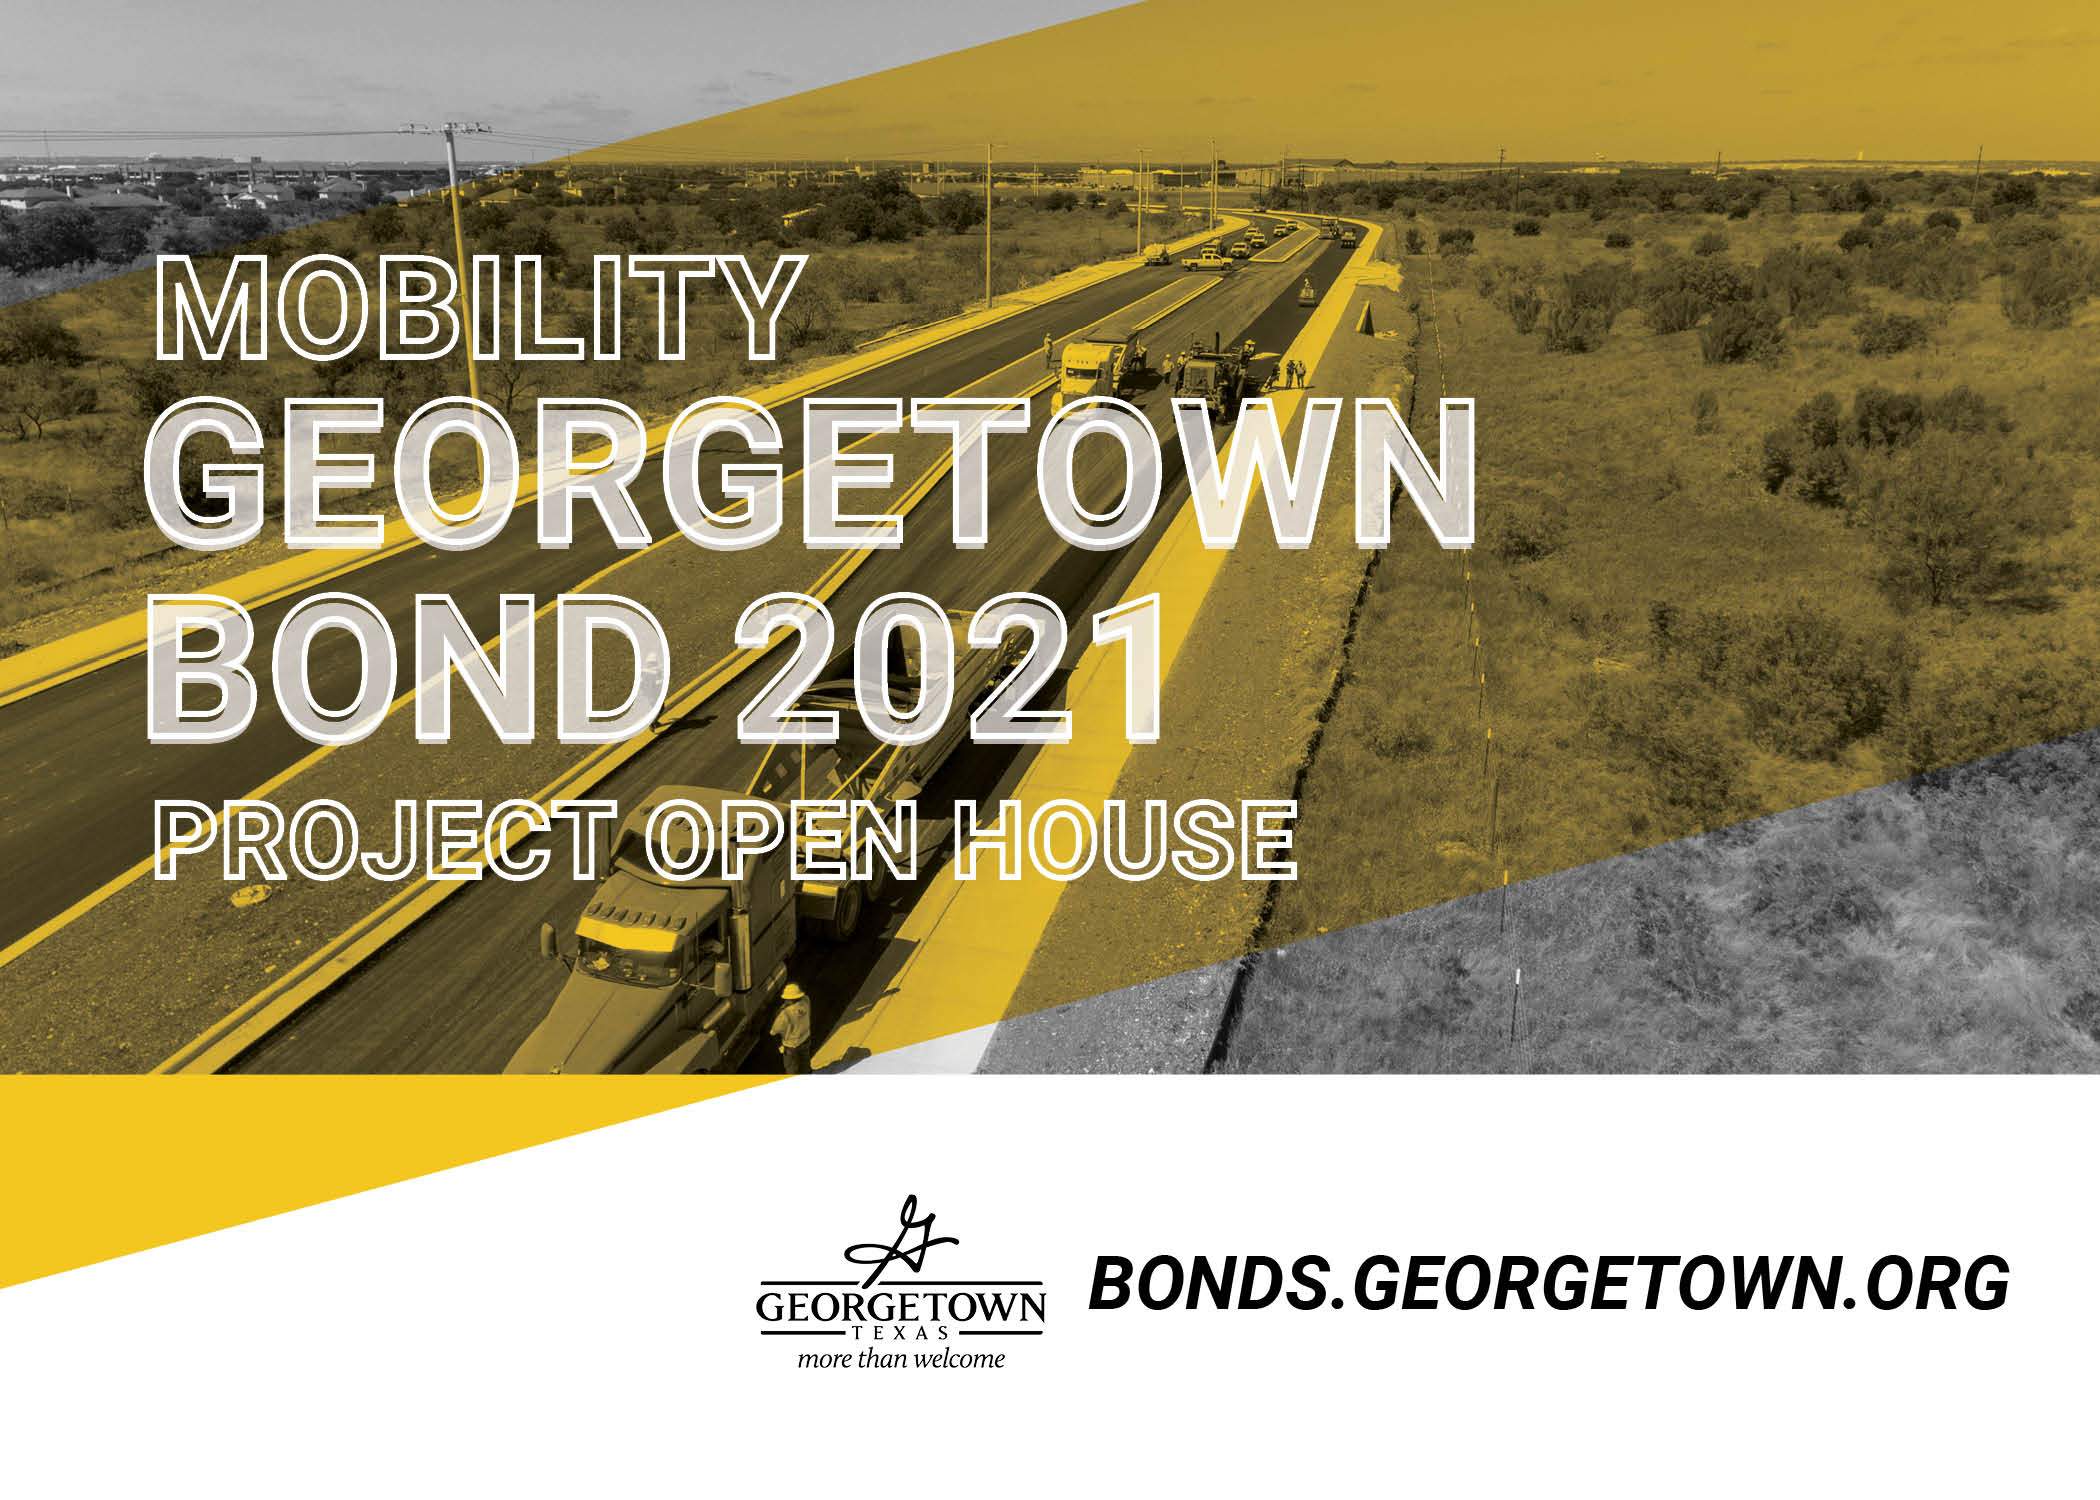 Georgetown Mobility Bond 2021 Project Open House graphic